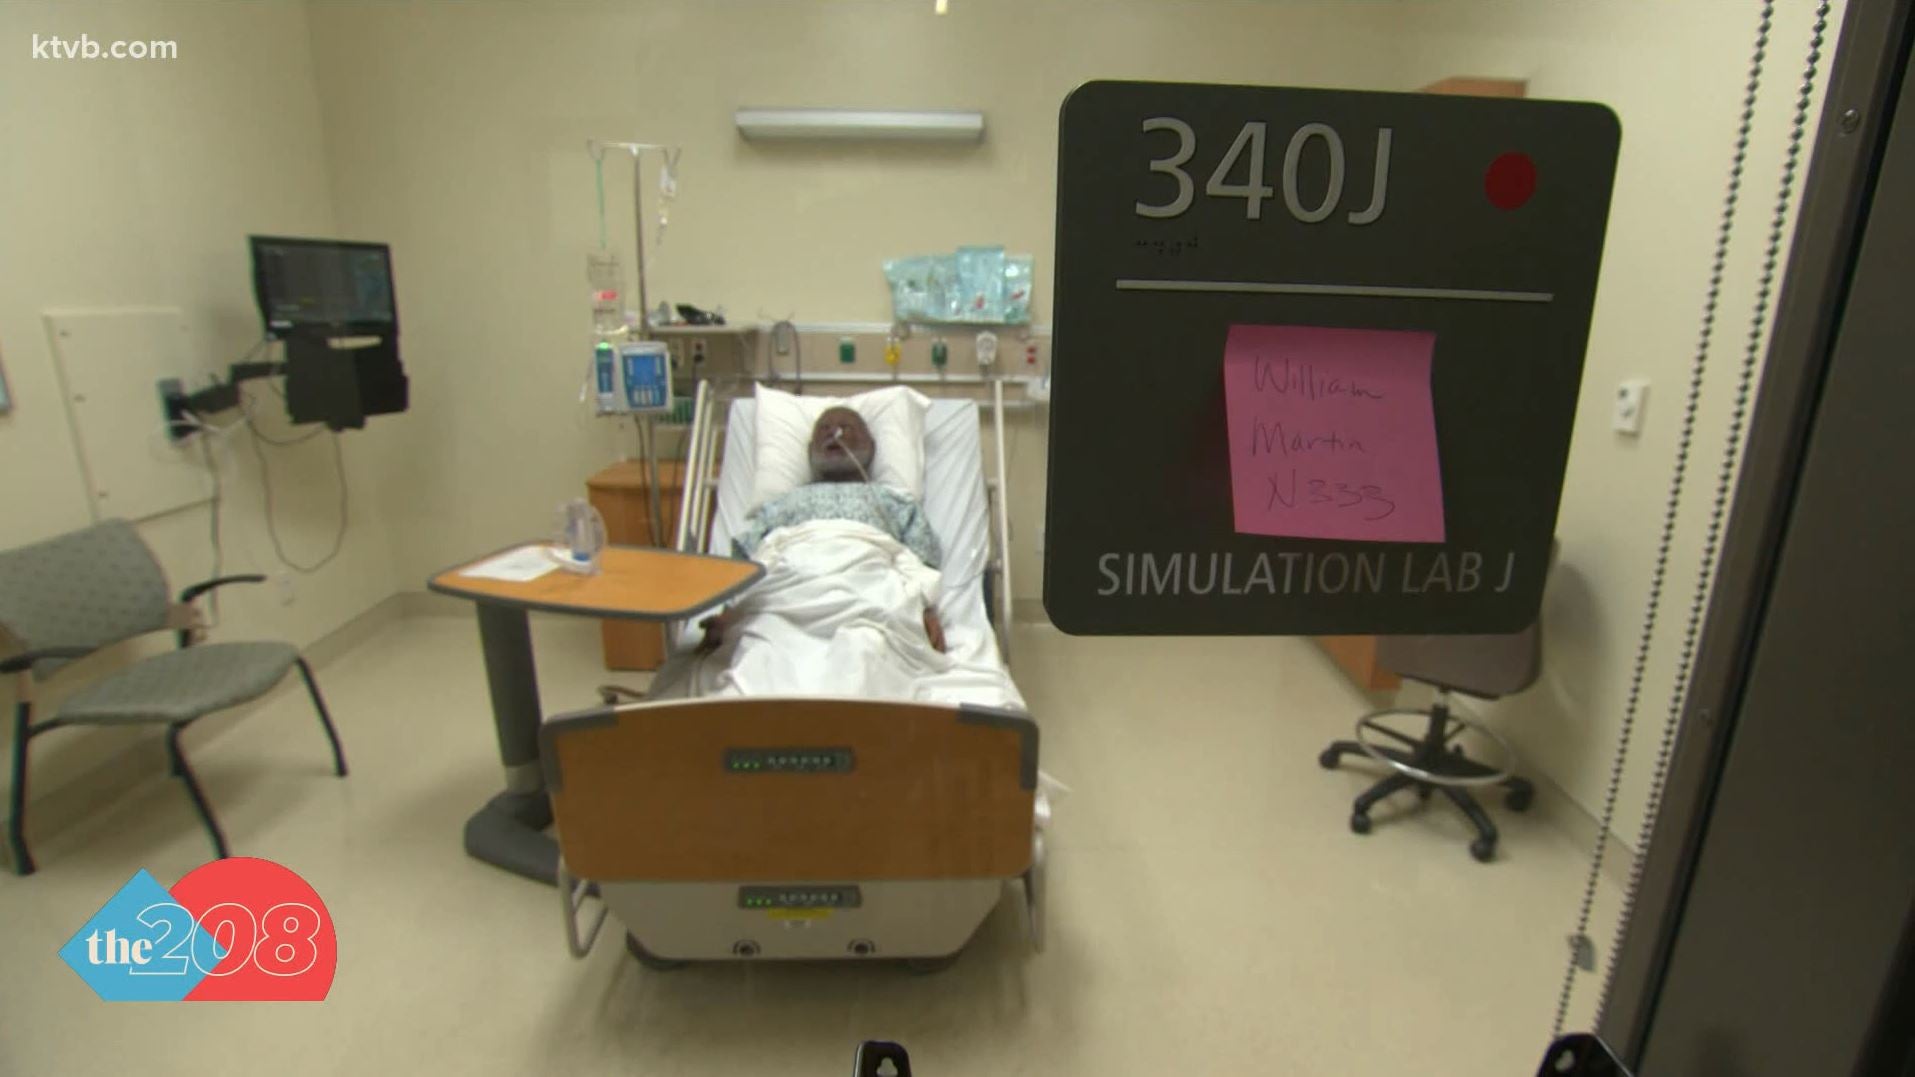 View through an observation window into a simulation hospital room. An adult male mannikin rests on the bed with a nasal tube inserted. A labelplate is mounted on the window indicating the room is a simulation lab. 